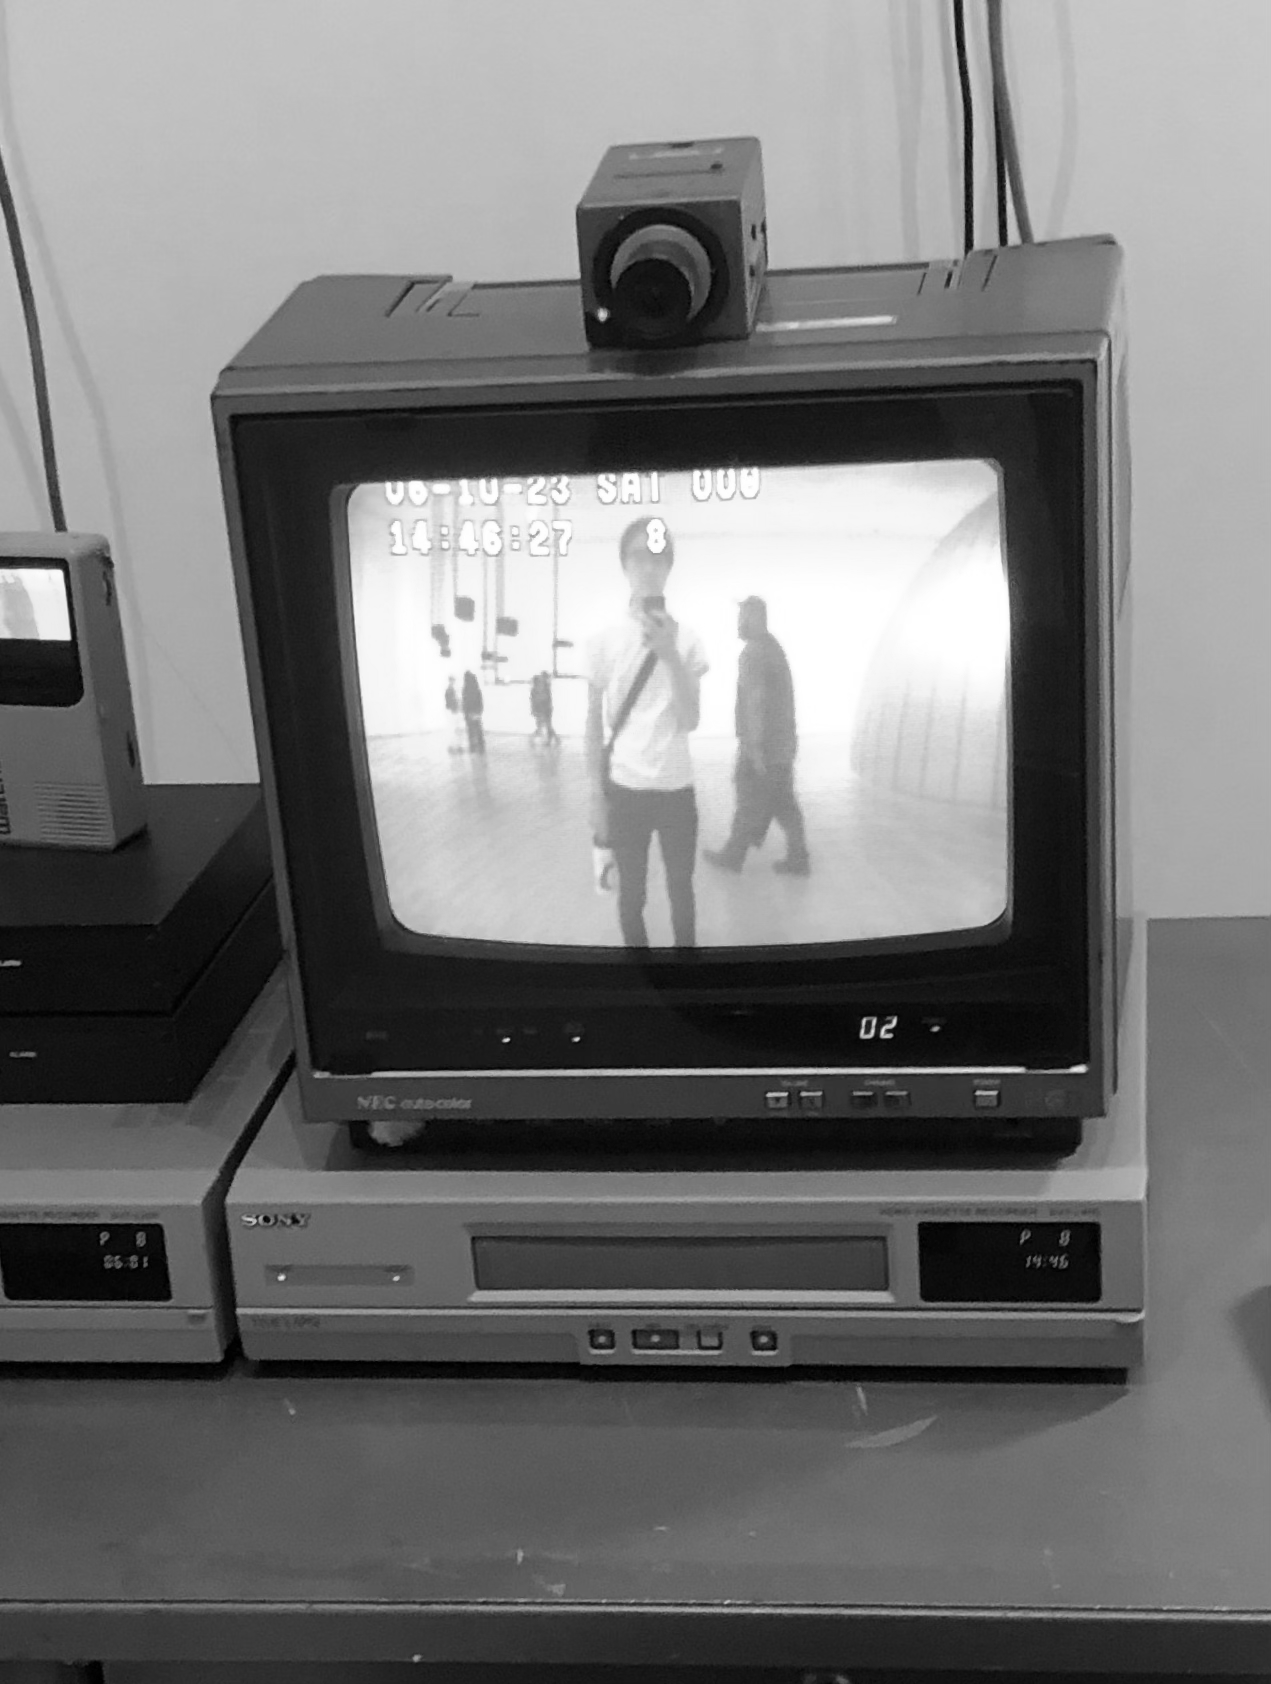 A CCTV monitor with a camera above it showing an image of Alexander holding his phone standing in front